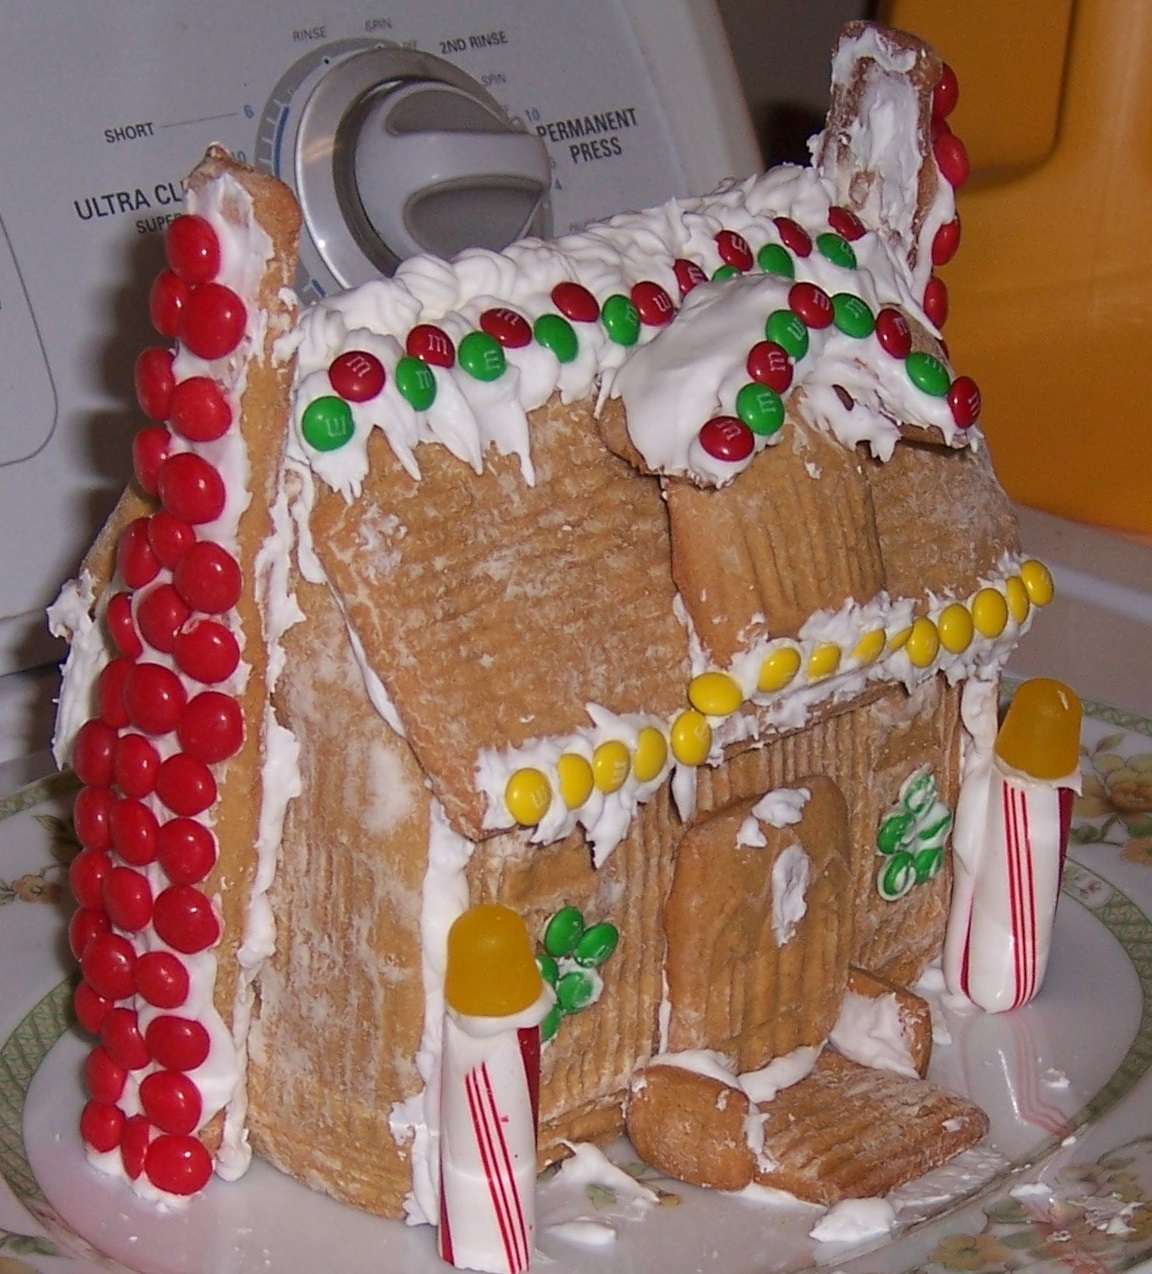 Quit making Gingerbread Houses with raw egg white